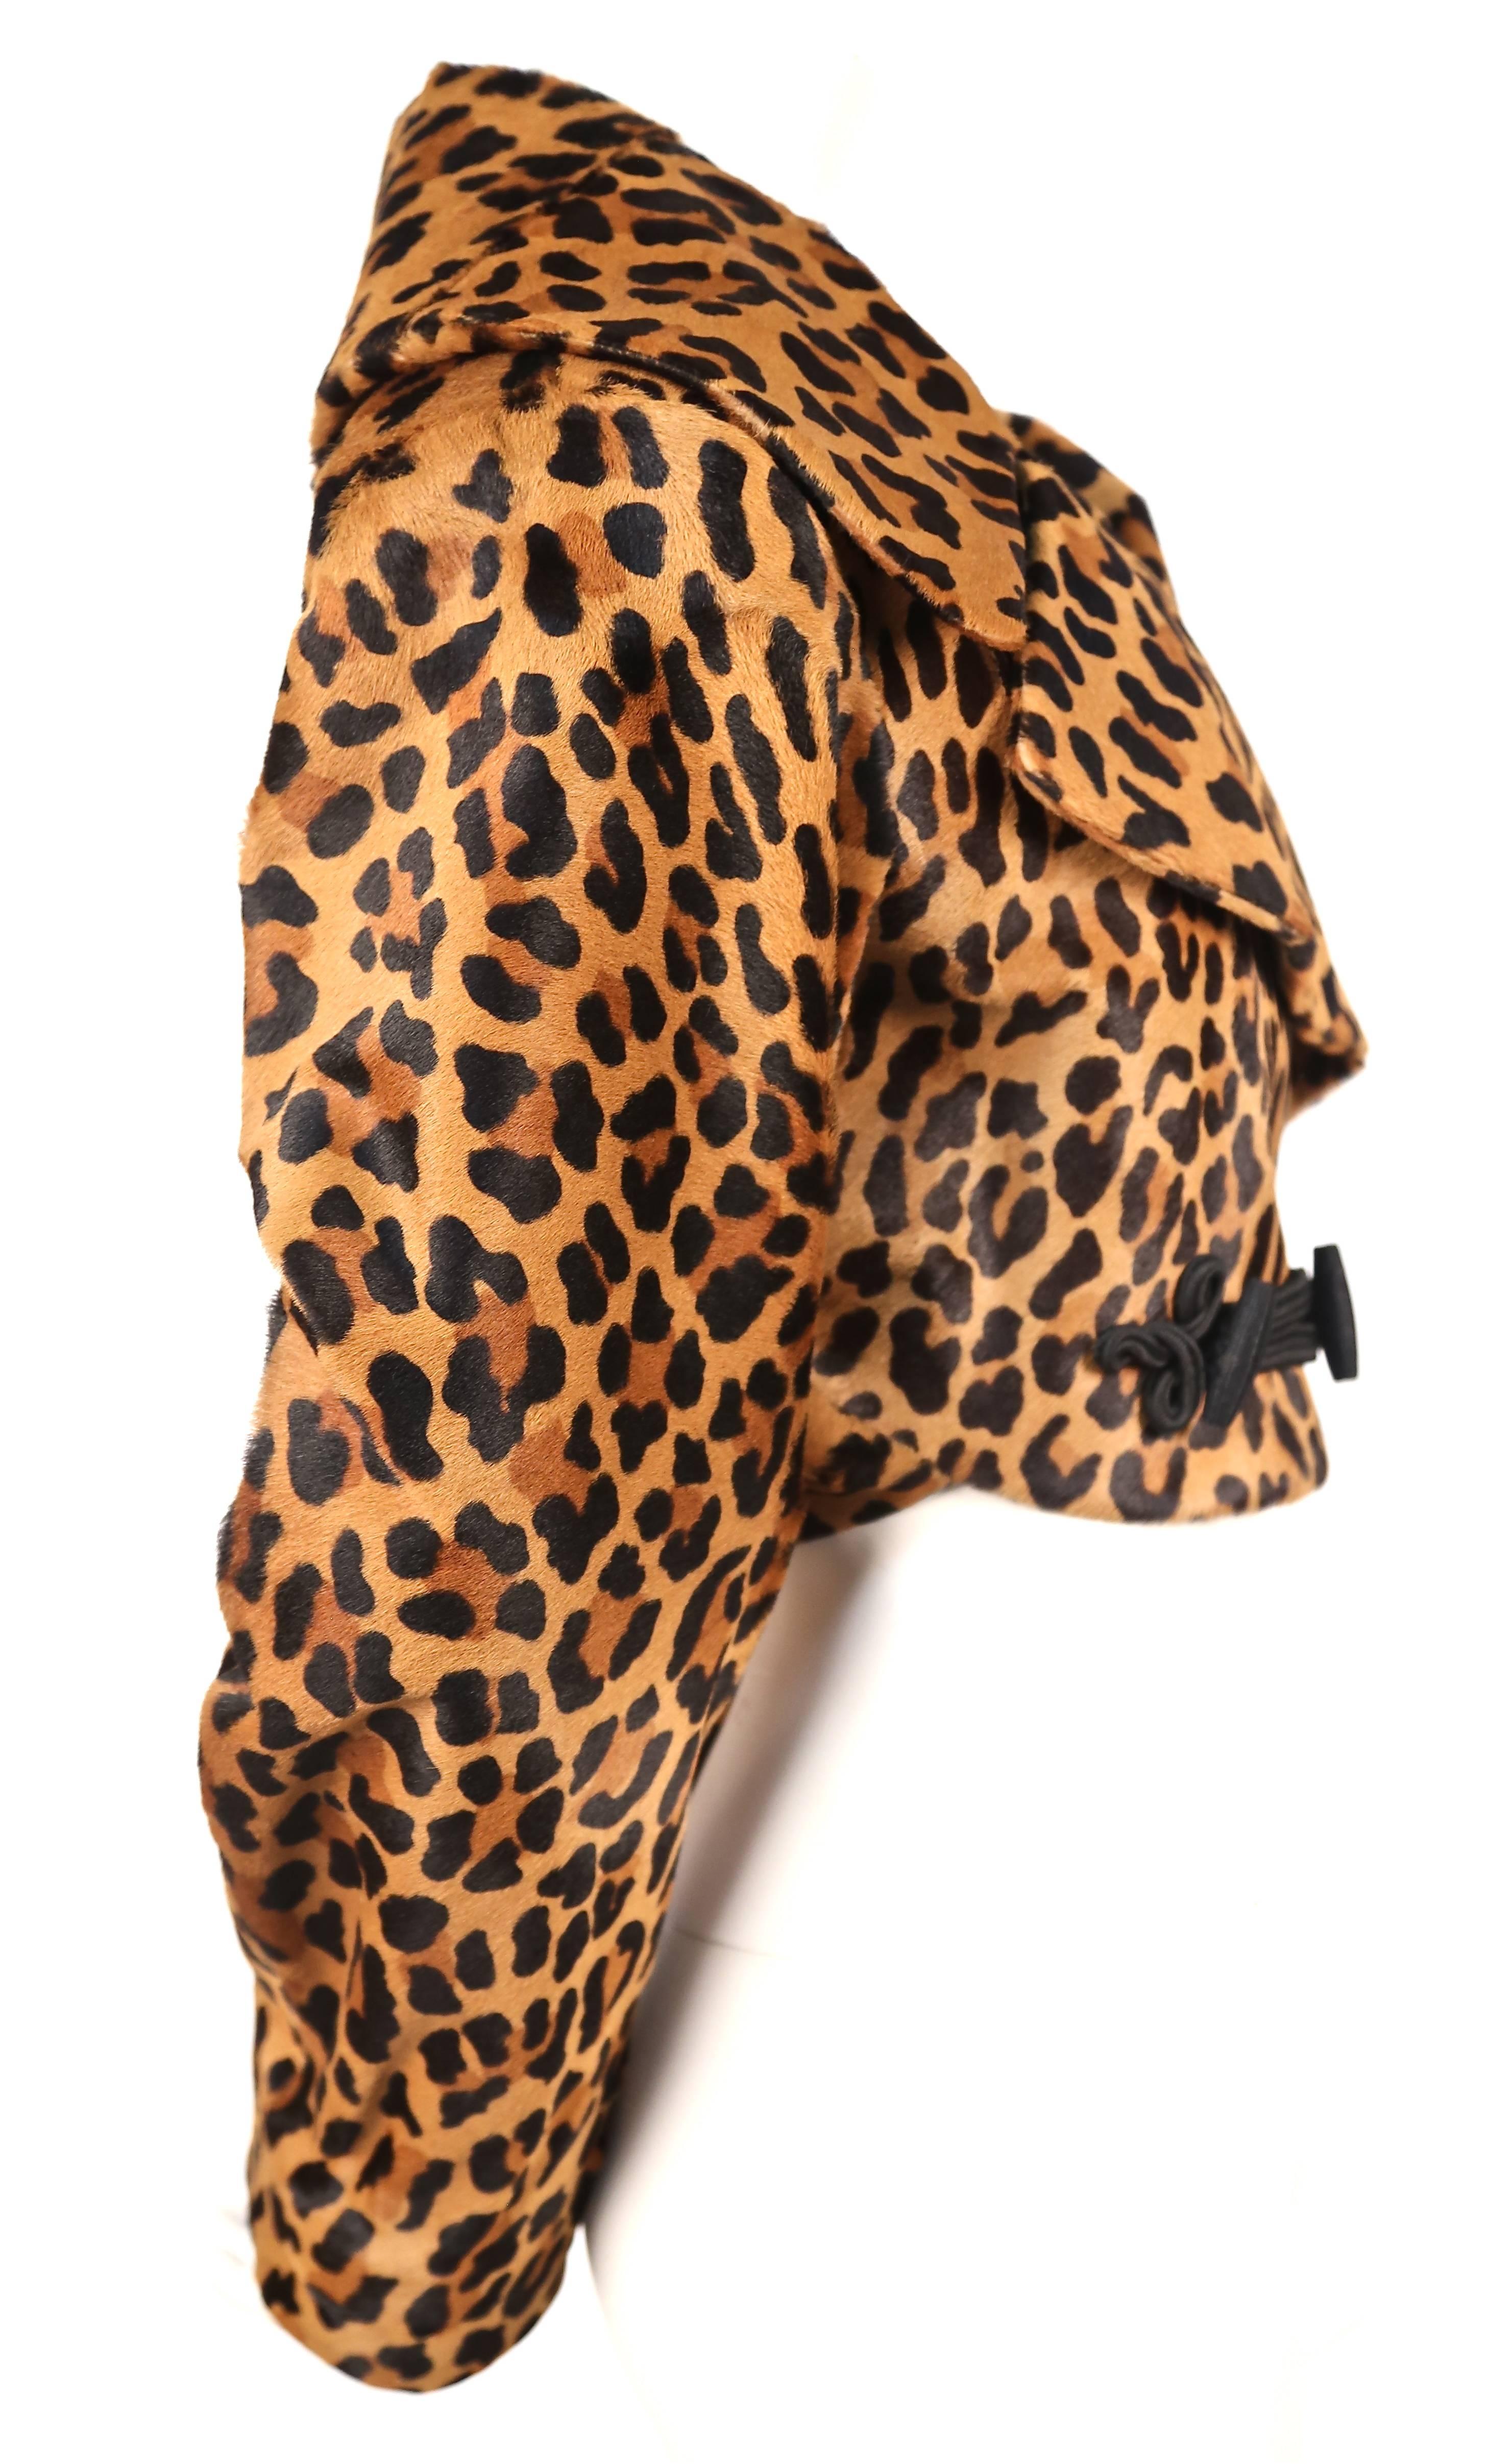 Extremely rare leopard printed calf fur jacket with decorative black frog closure designed by Azzedine Alaia dating to fall of 1991 exactly as seen on the runway. Labeled a French size 38 although there is some flexibility due to the cut. 